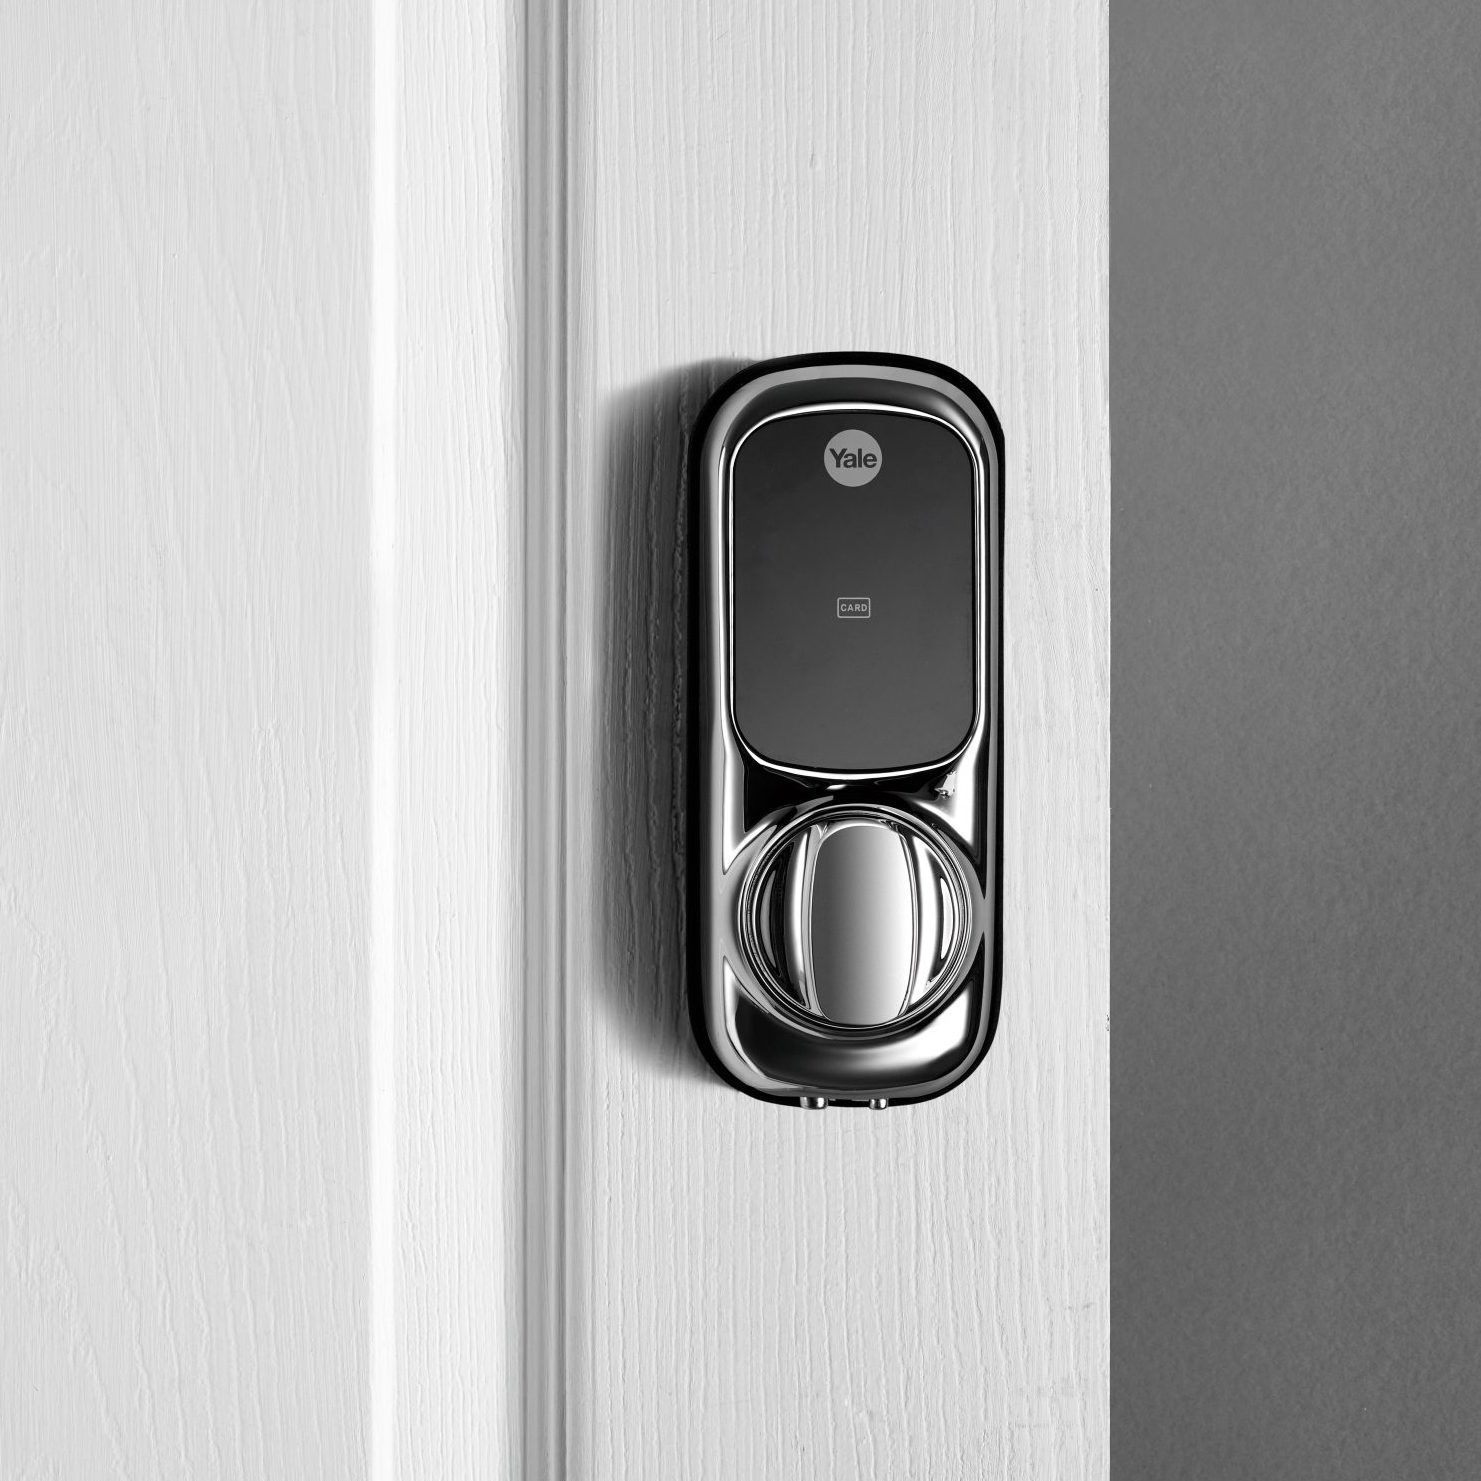 A bump key is a device that can be made from a simple house key to help you  should you find yourself locked out of the house. Lo…